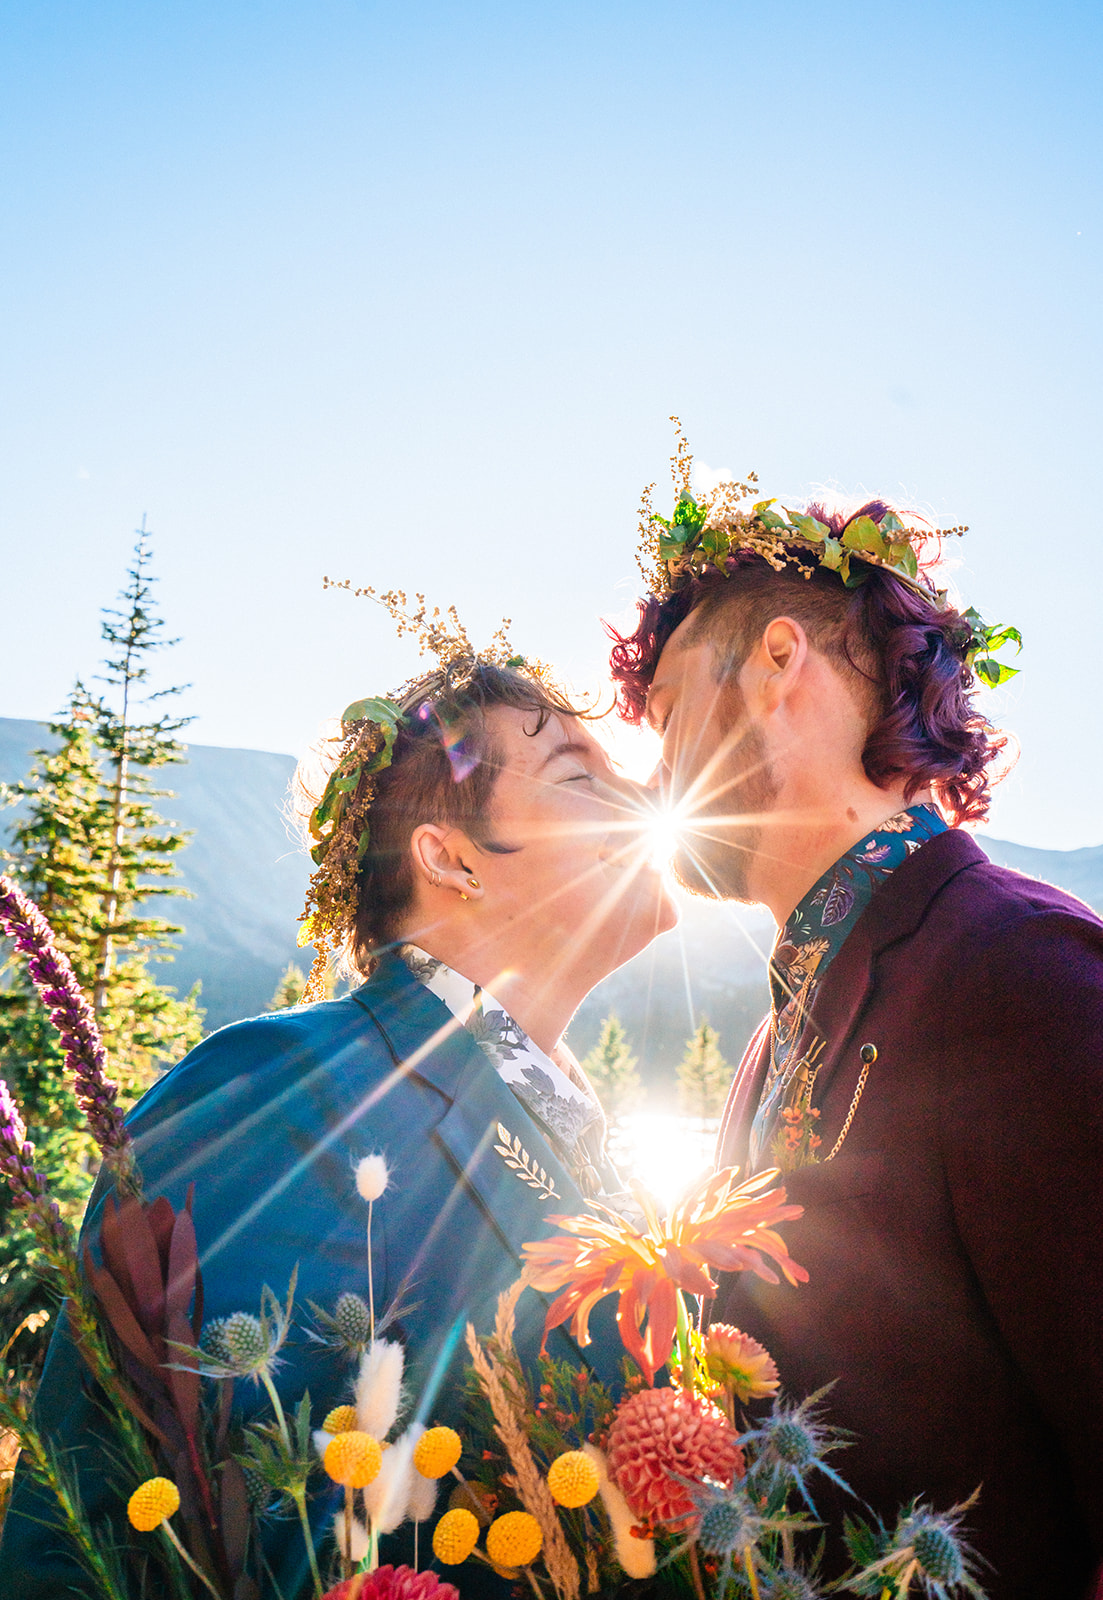 Newlyweds kissing with floral crowns on their heads